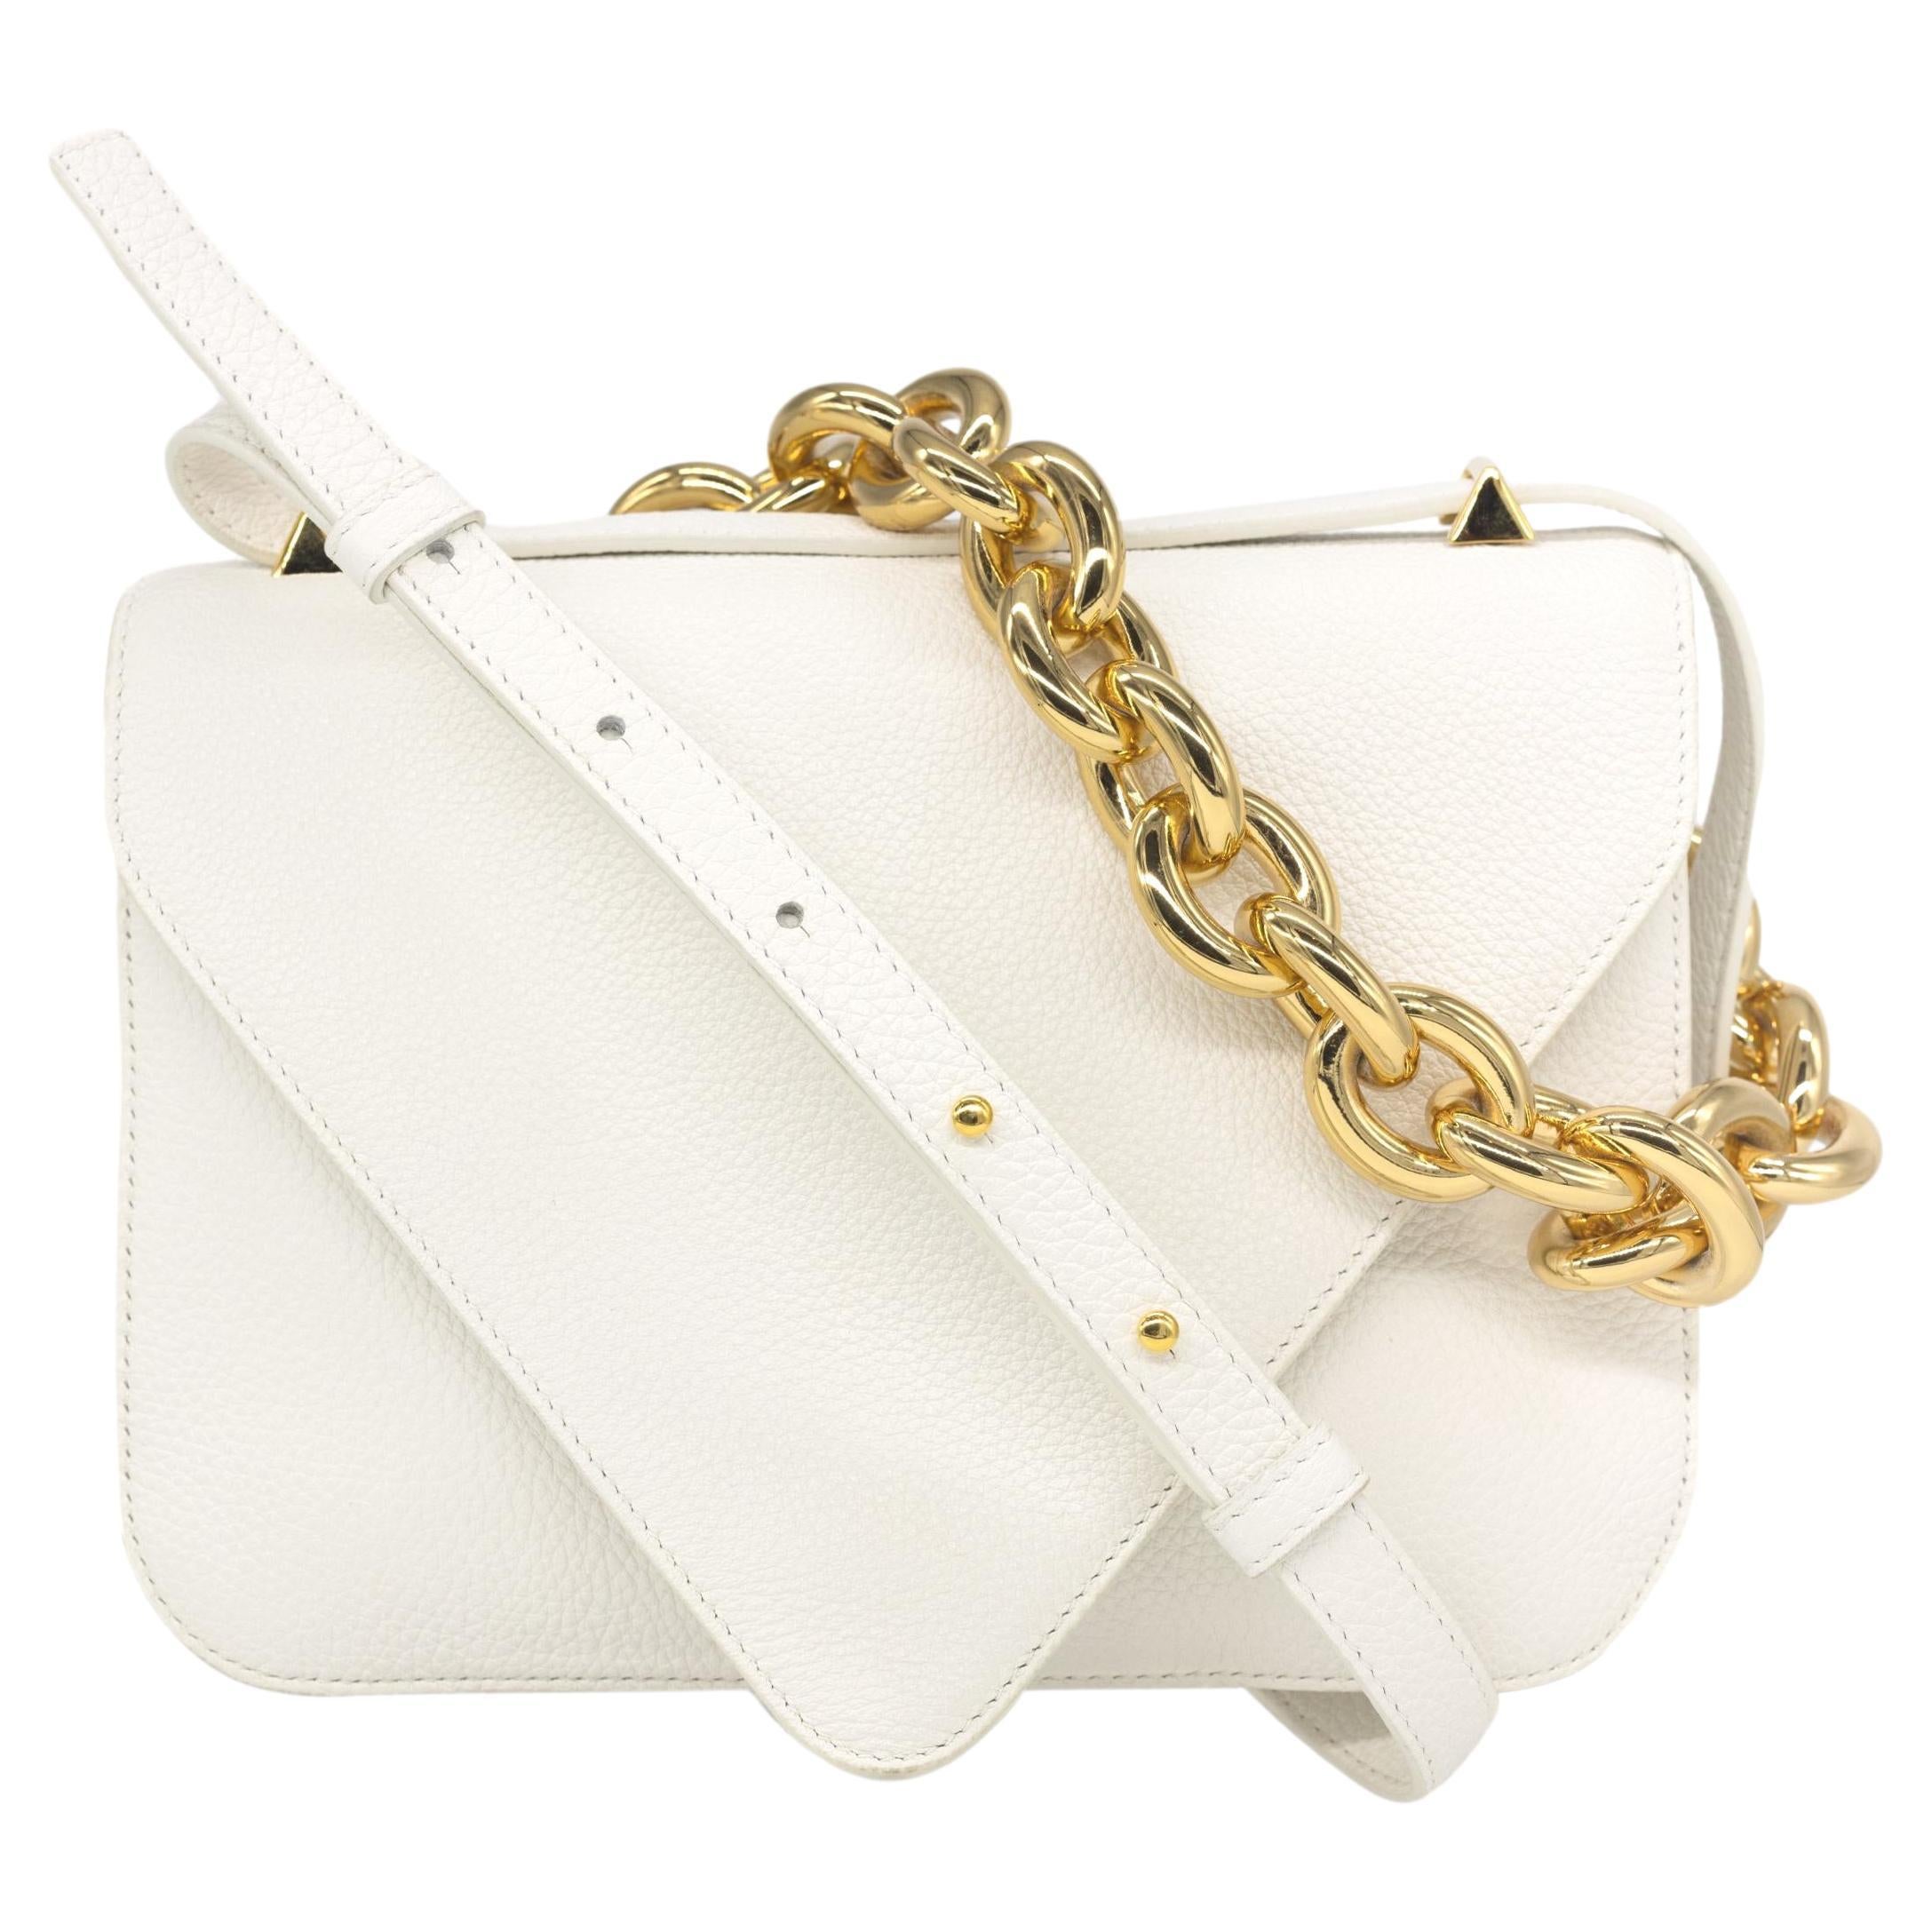 Bottega Veneta Mount Envelope Small White Leather Top Handle Crossbody Bag, 2021. This contemporary piece of fashion was introduced for the Fall 2021 